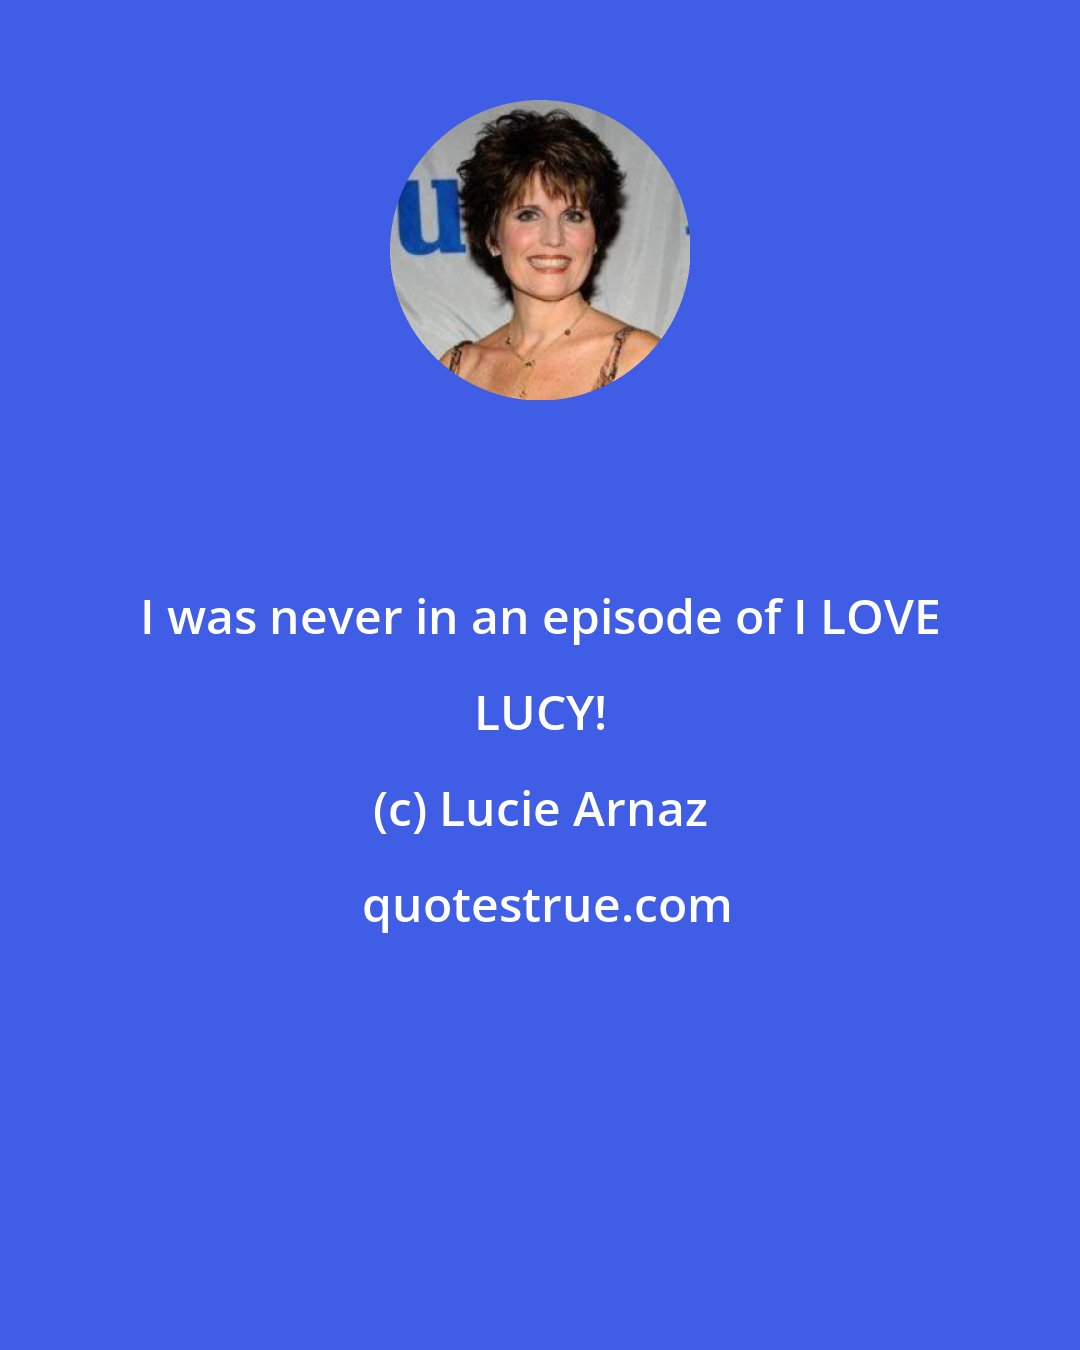 Lucie Arnaz: I was never in an episode of I LOVE LUCY!